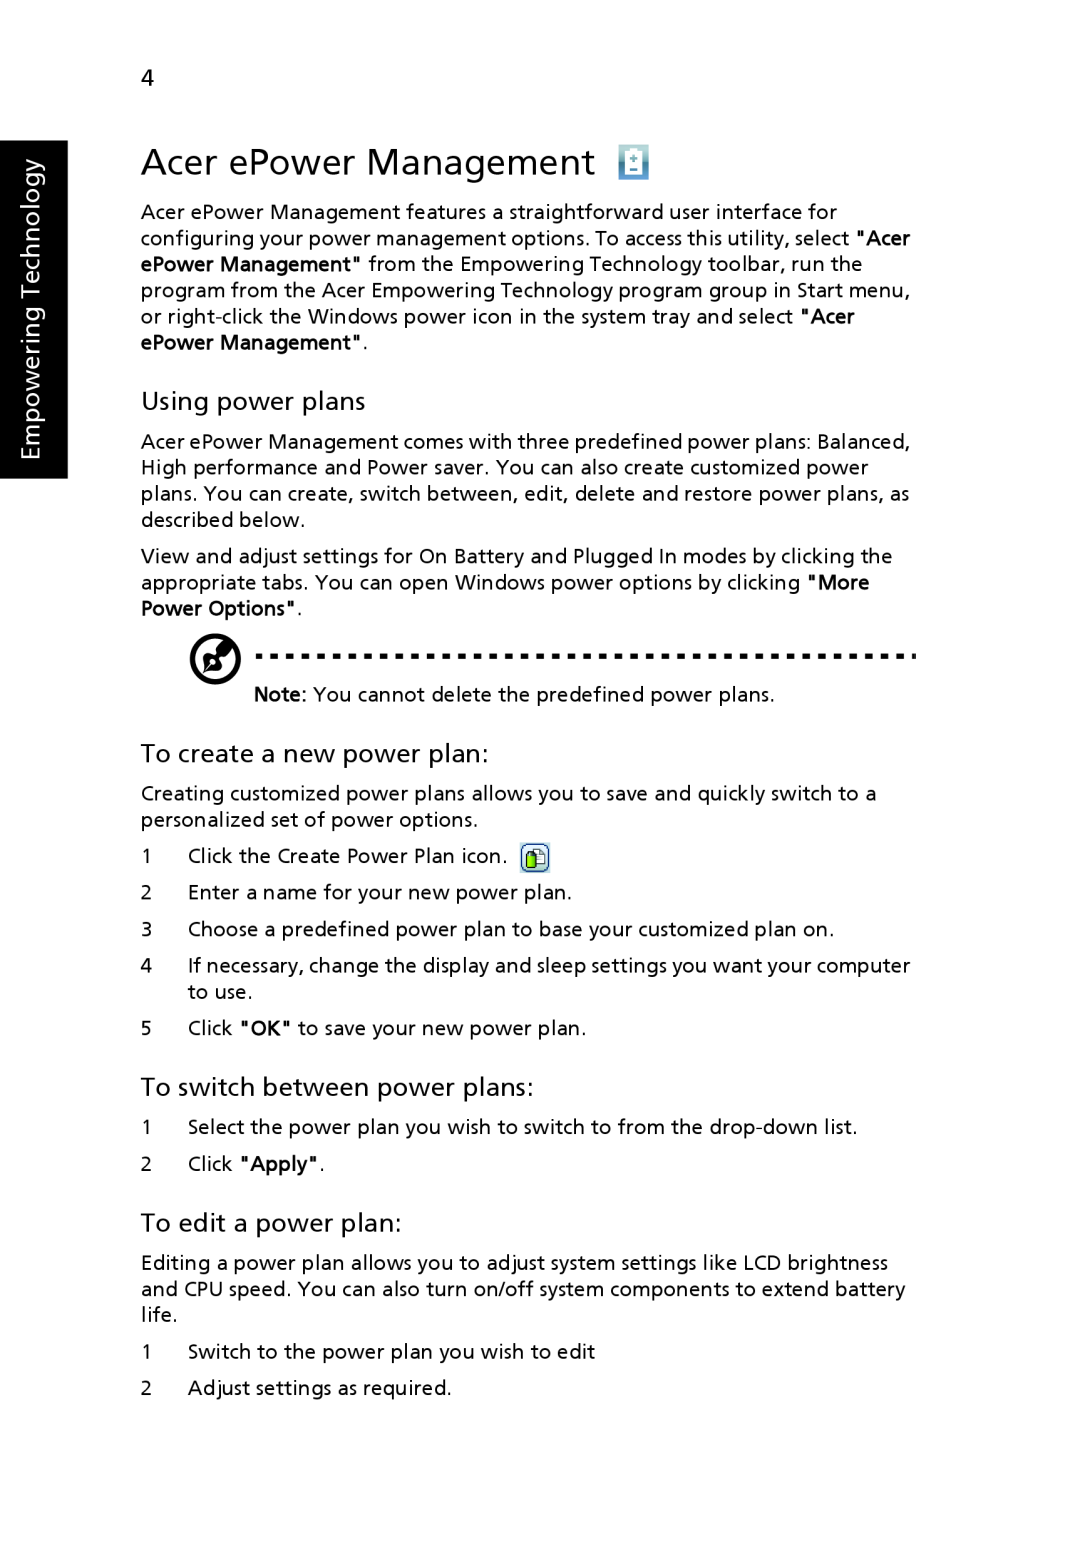 Acer 6492G manual Acer ePower Management, Using power plans, To create a new power plan, To switch between power plans 